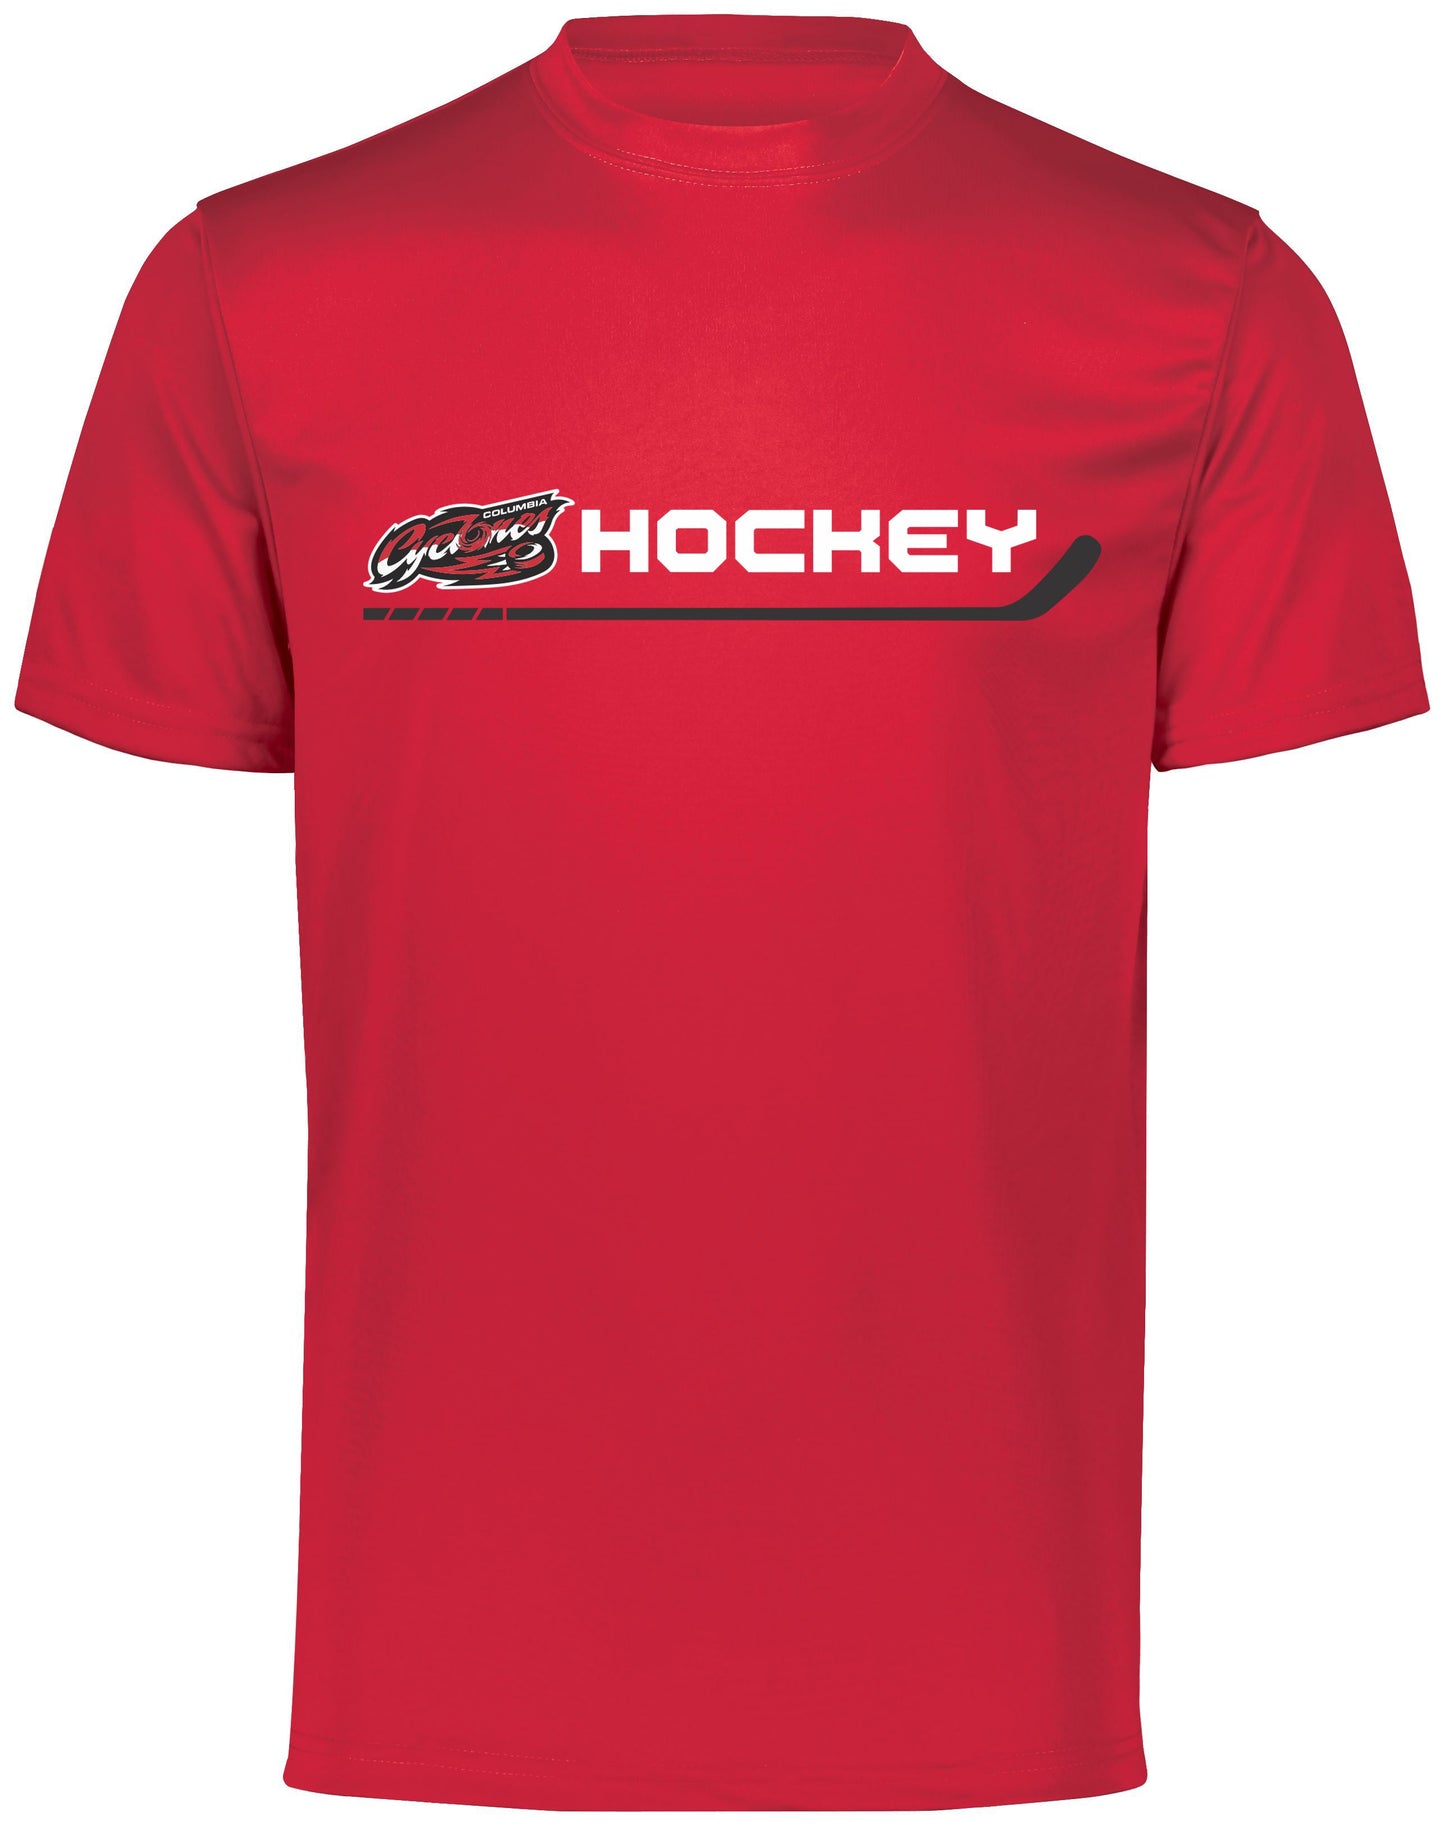 Cyclones Adult Wicking Tee